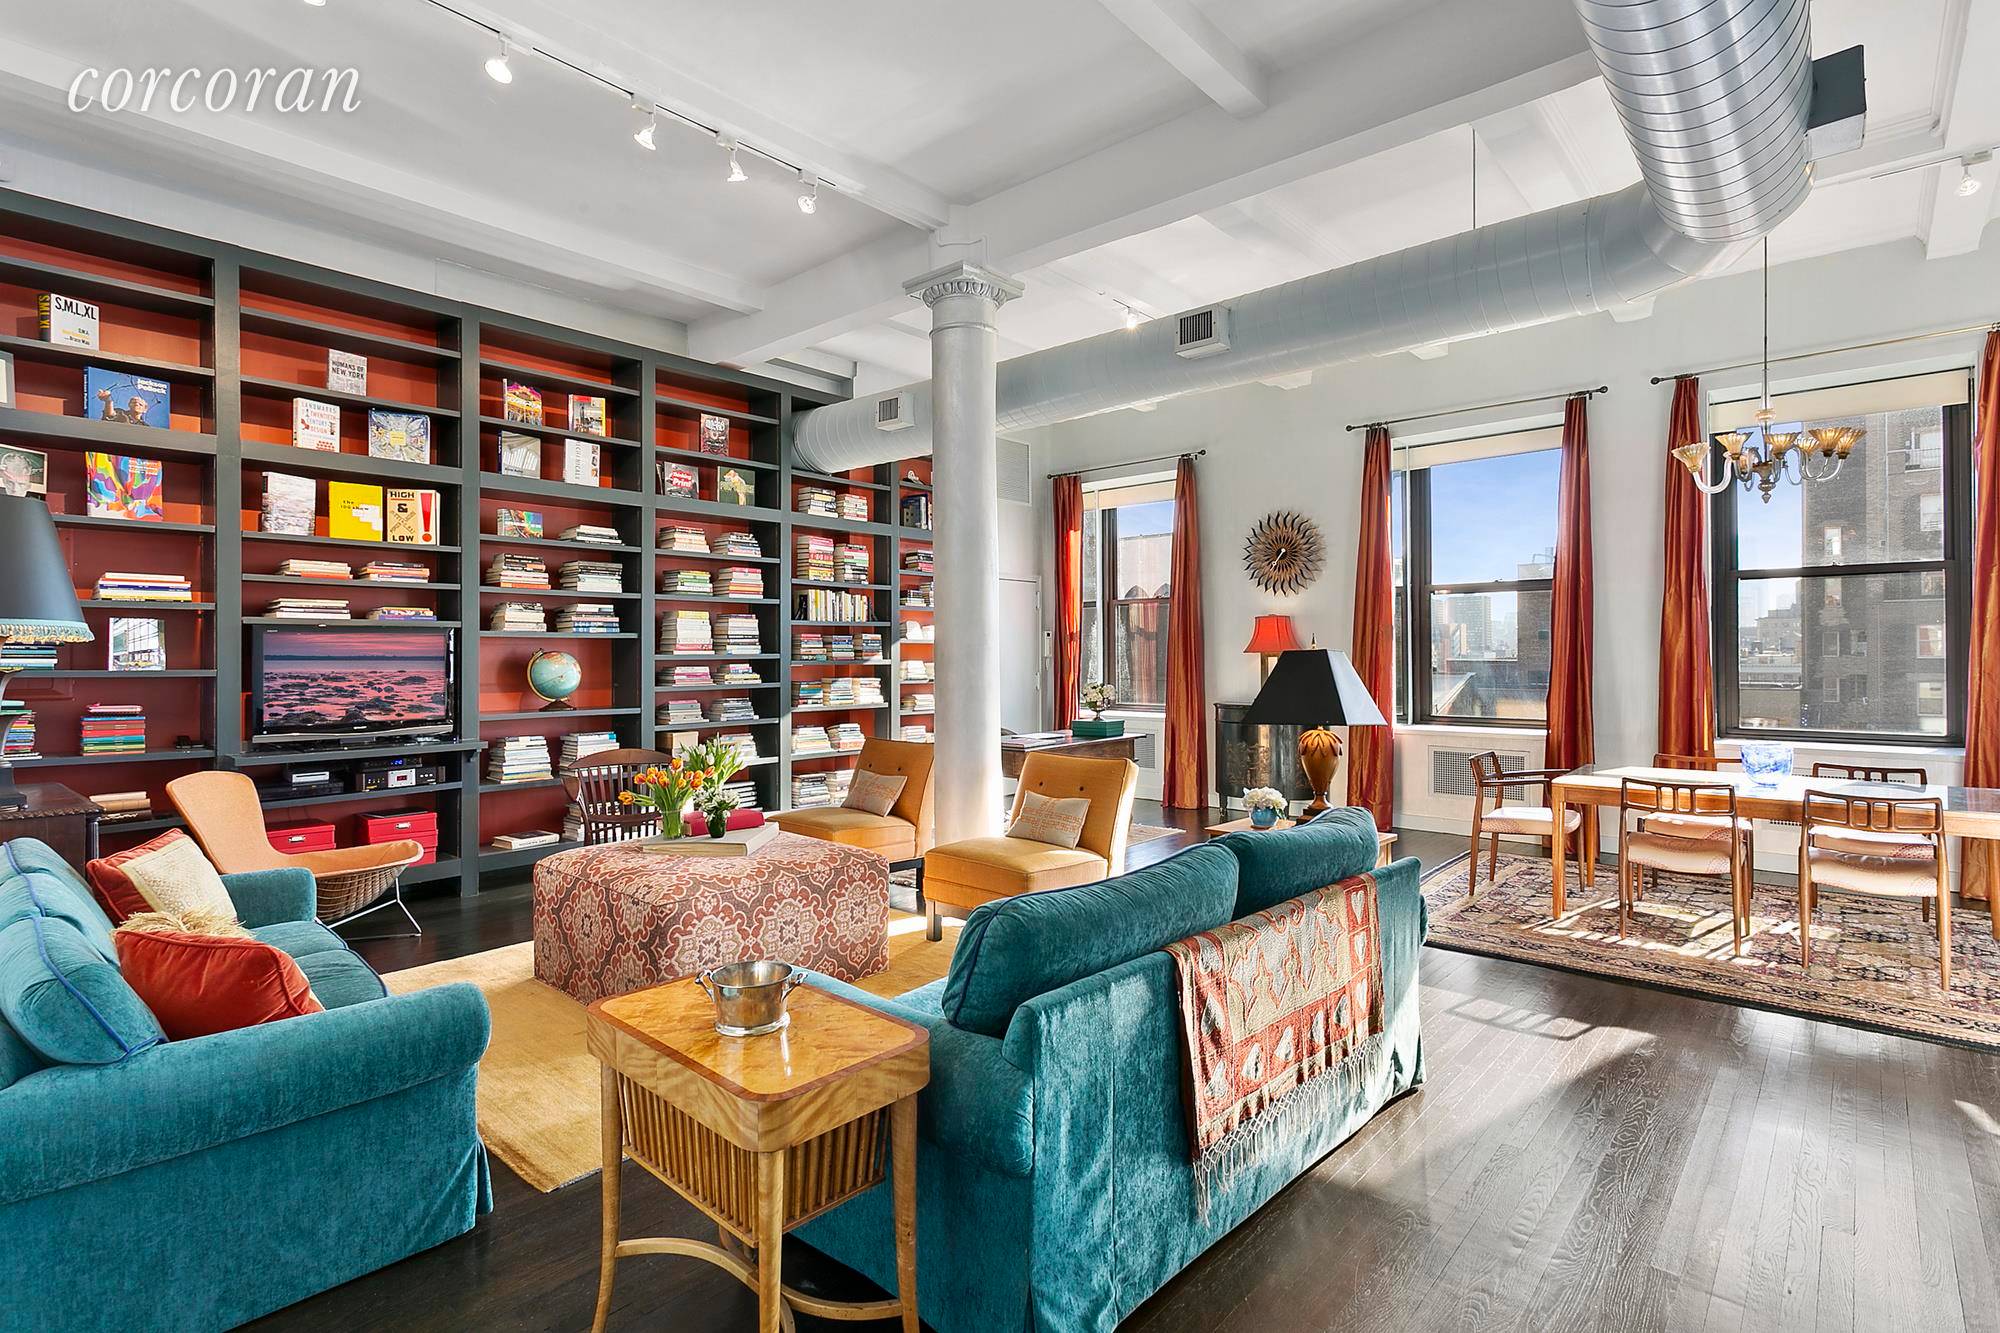 Enjoy staggering light and wonderful city views from this extraordinary Gold Coast, Greenwich Village loft.